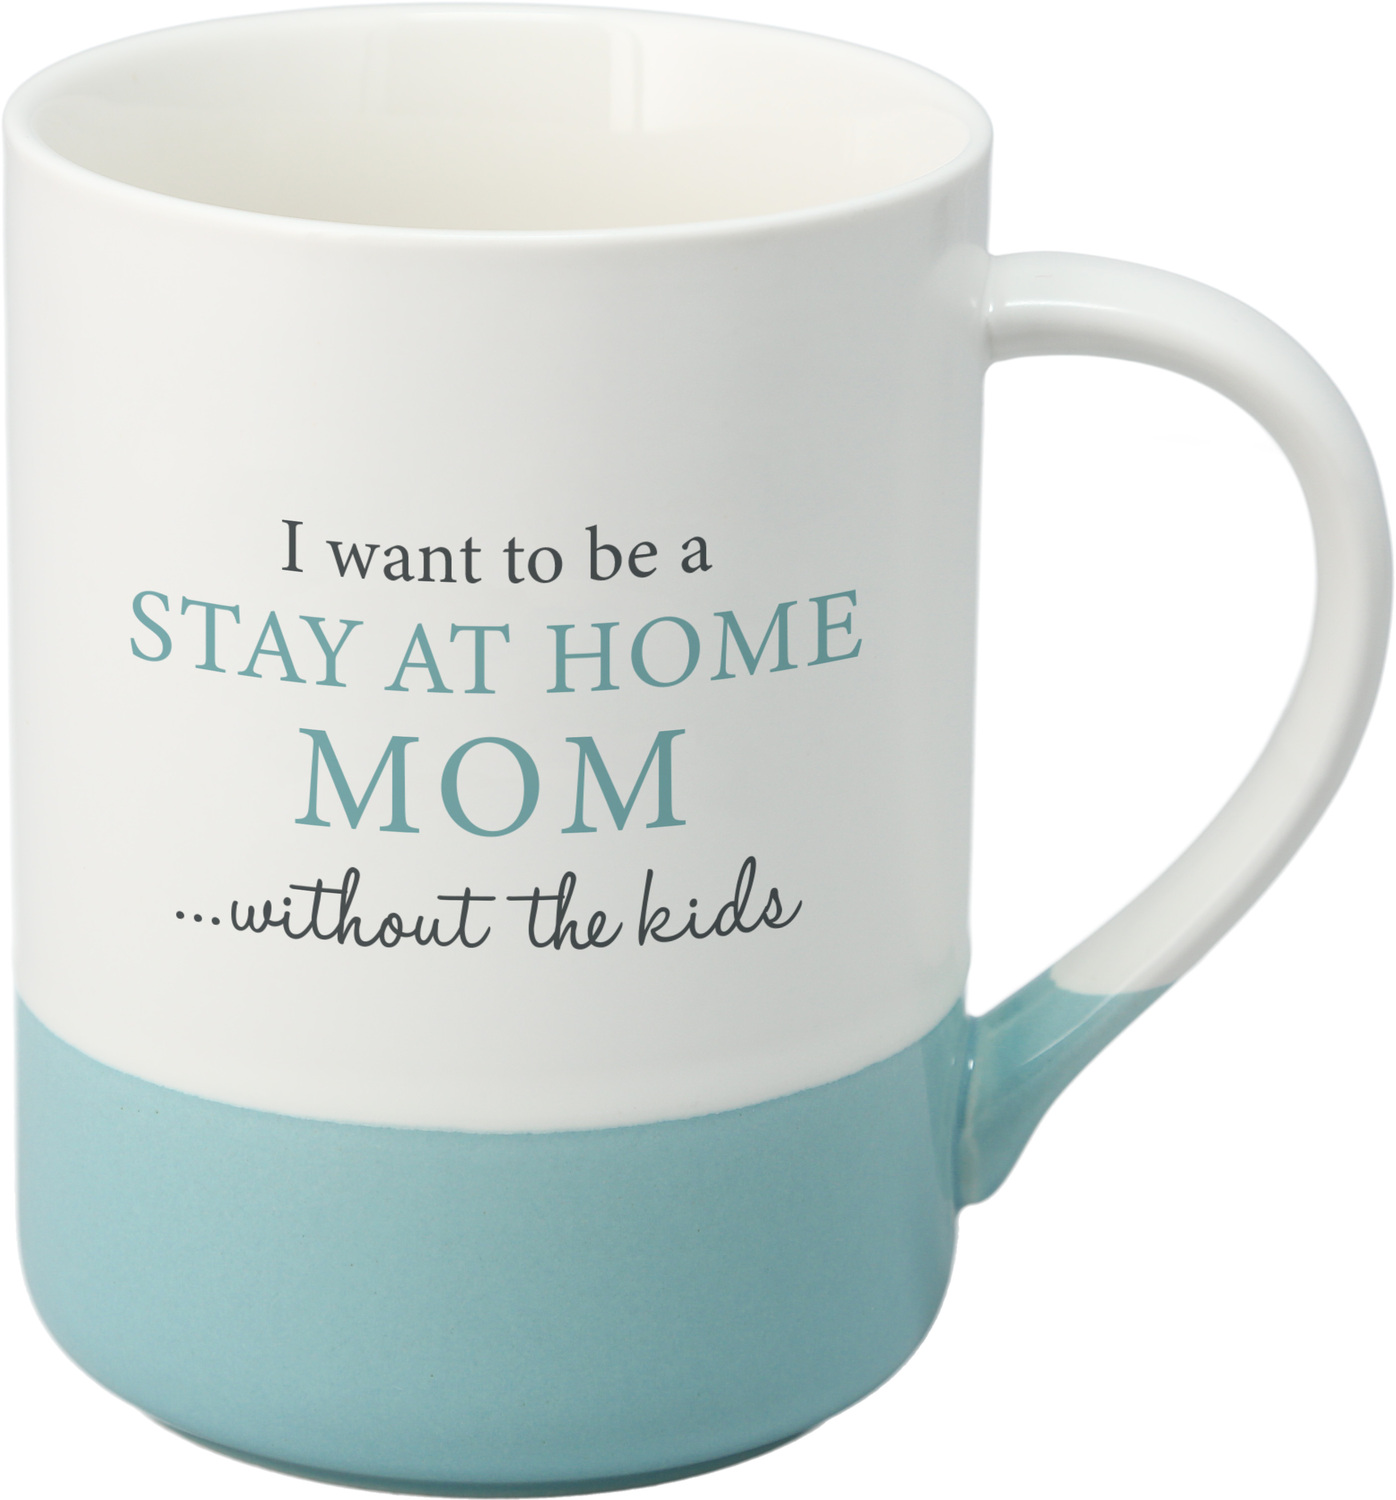 Stay at Home Mom by A-Parent-ly - Stay at Home Mom - 18 oz Mug